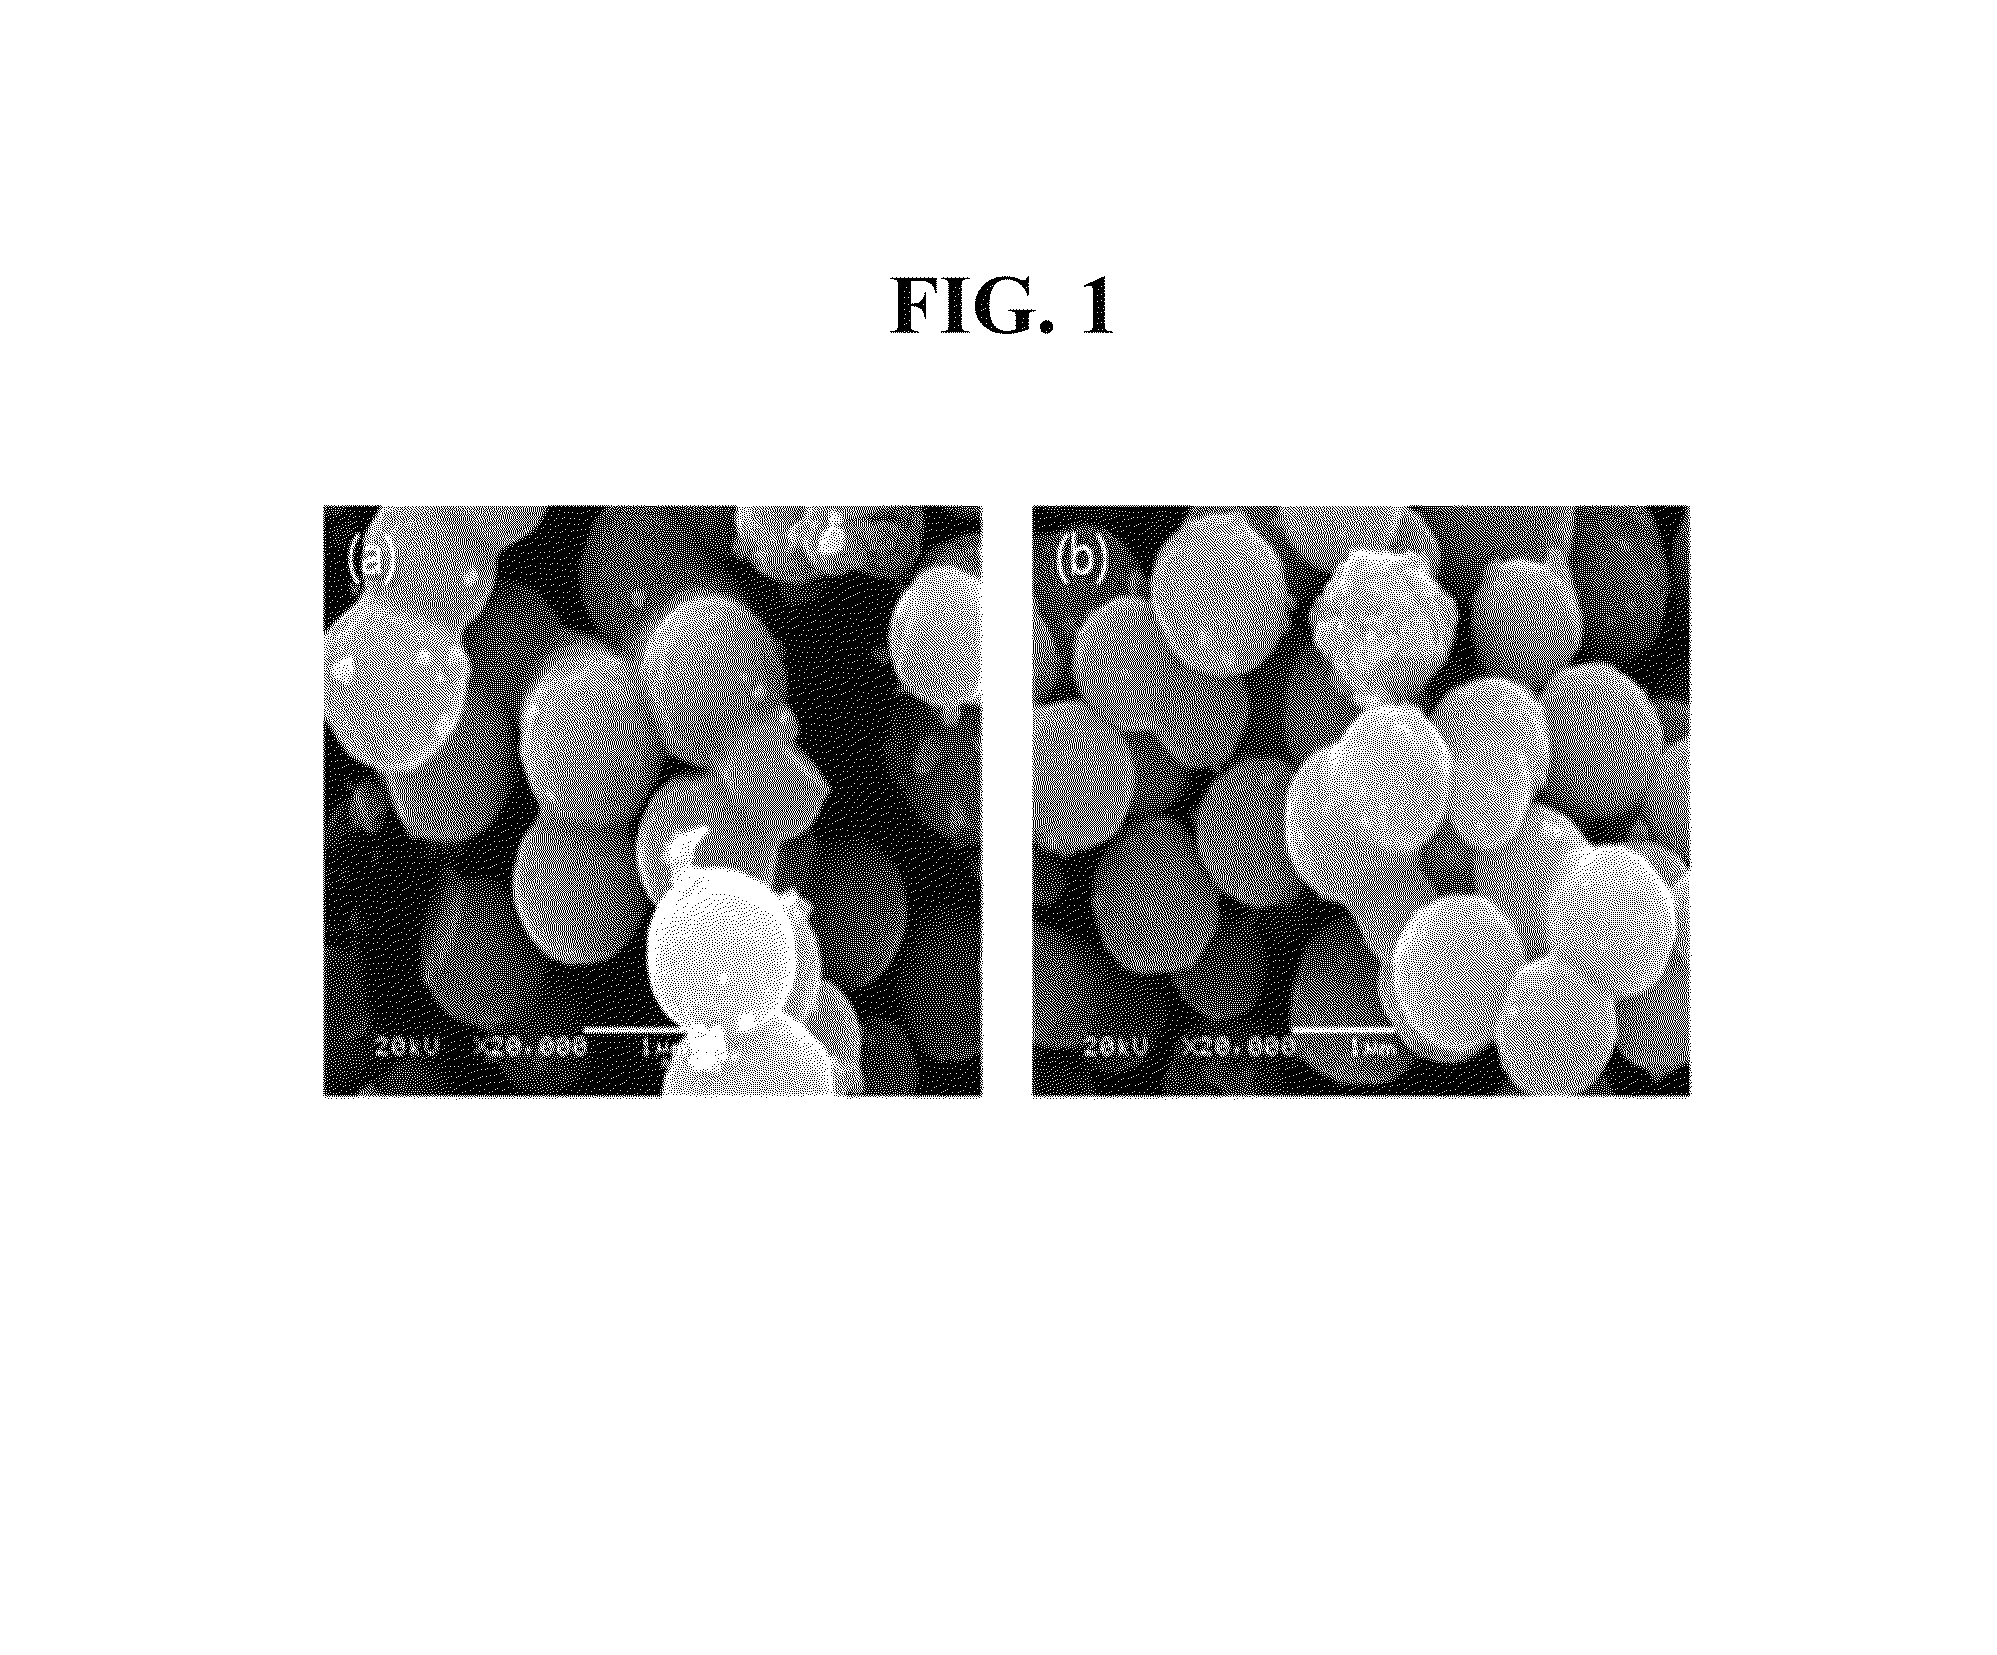 Method of synthesis of high dispersed spherical Y or Nb doped lithium titanate oxide using titanium tetrachloride and lithium hydroxide